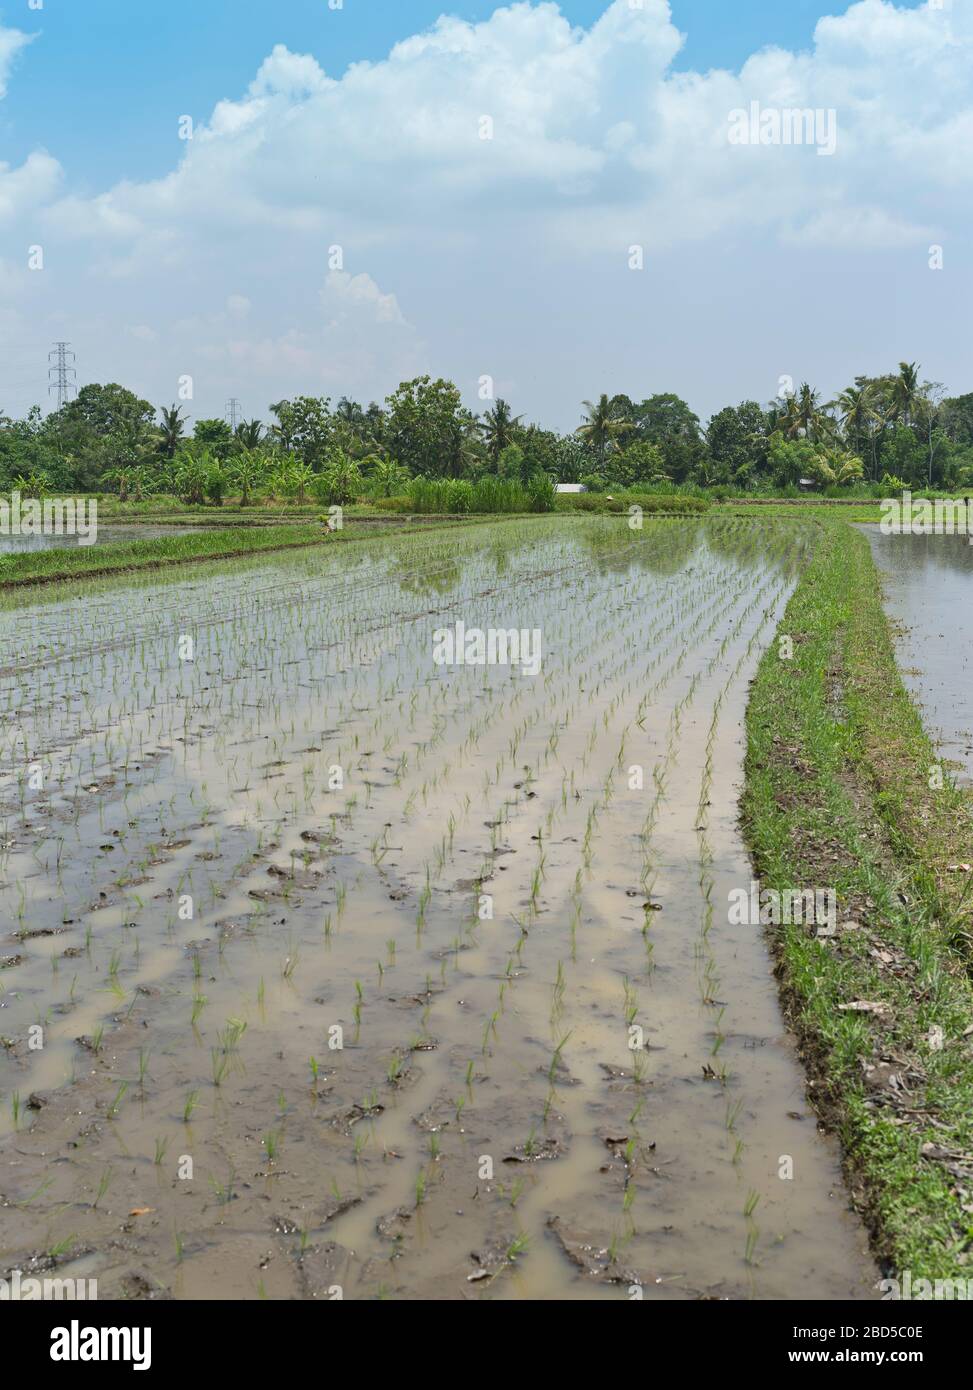 dh Balinese fields planted rice BALI INDONESIA In wet paddy field farming crop paddies asia indonesian crops Stock Photo